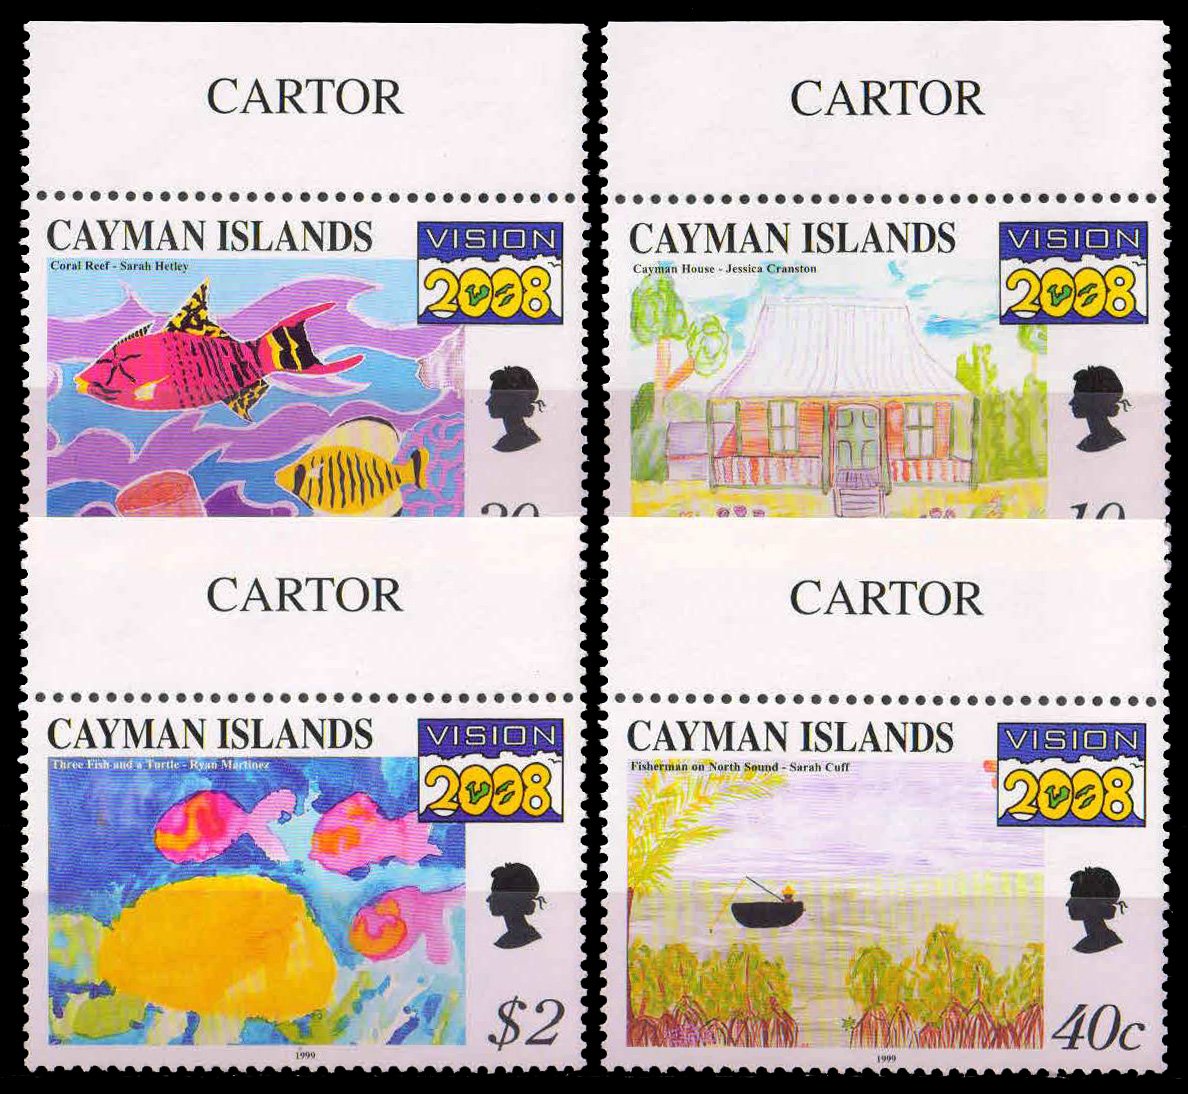 CAYMAN ISLANDS 1999-Vision 2008 Project, Paintings, Set of 4, MNH, S.G. 888-891, Cat � 7-